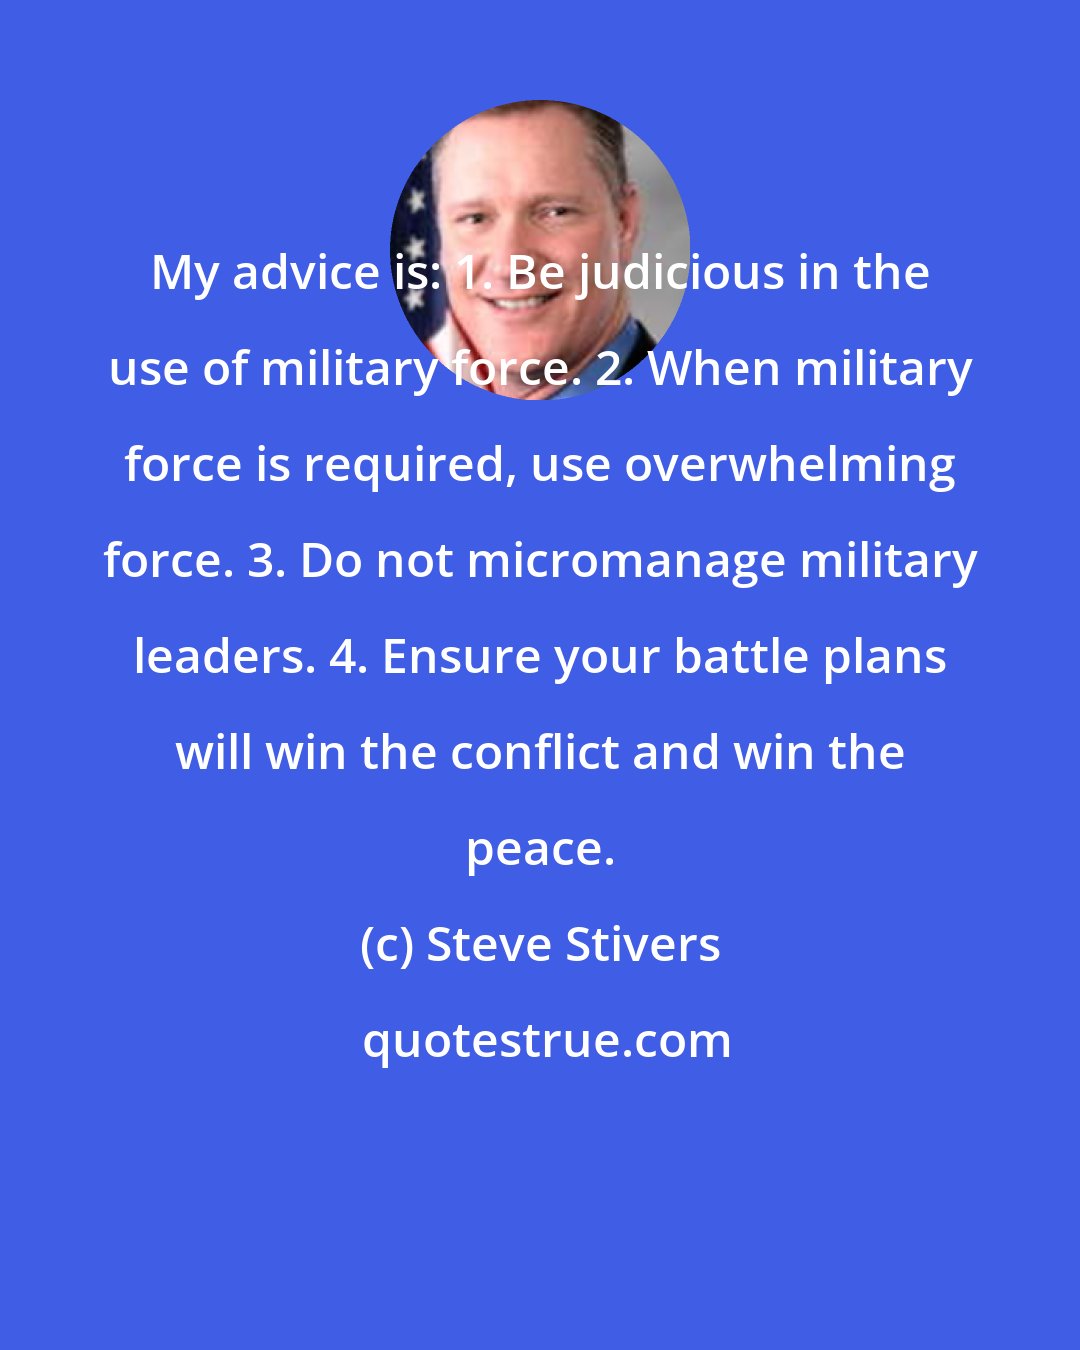 Steve Stivers: My advice is: 1. Be judicious in the use of military force. 2. When military force is required, use overwhelming force. 3. Do not micromanage military leaders. 4. Ensure your battle plans will win the conflict and win the peace.